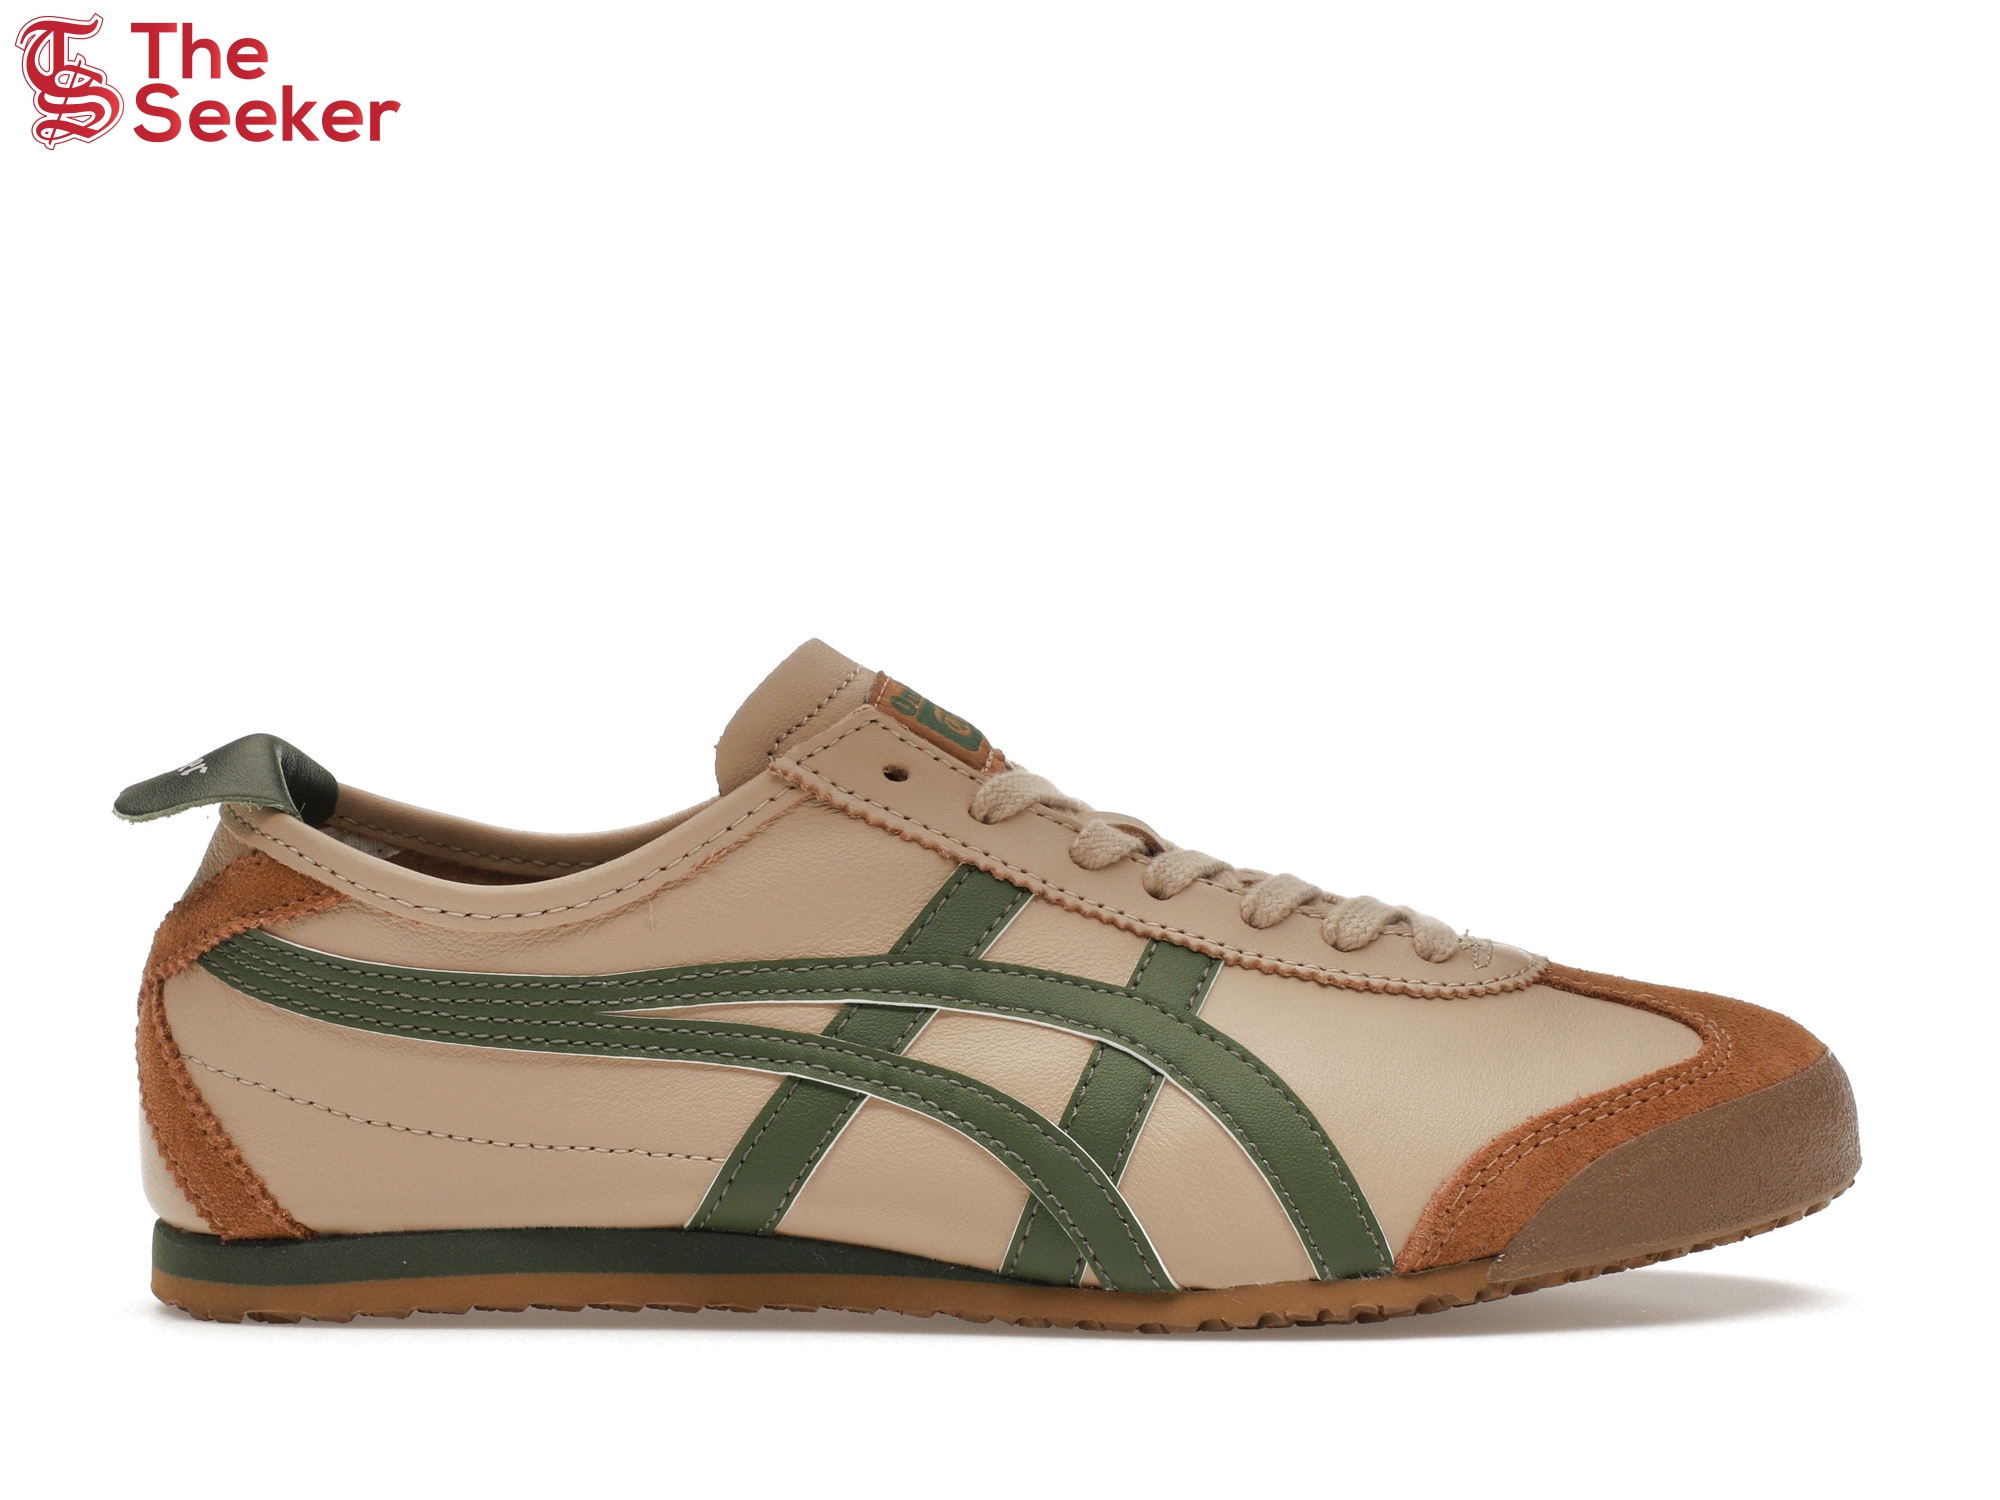 Onitsuka Tiger Mexico 66 Beige Grass Green